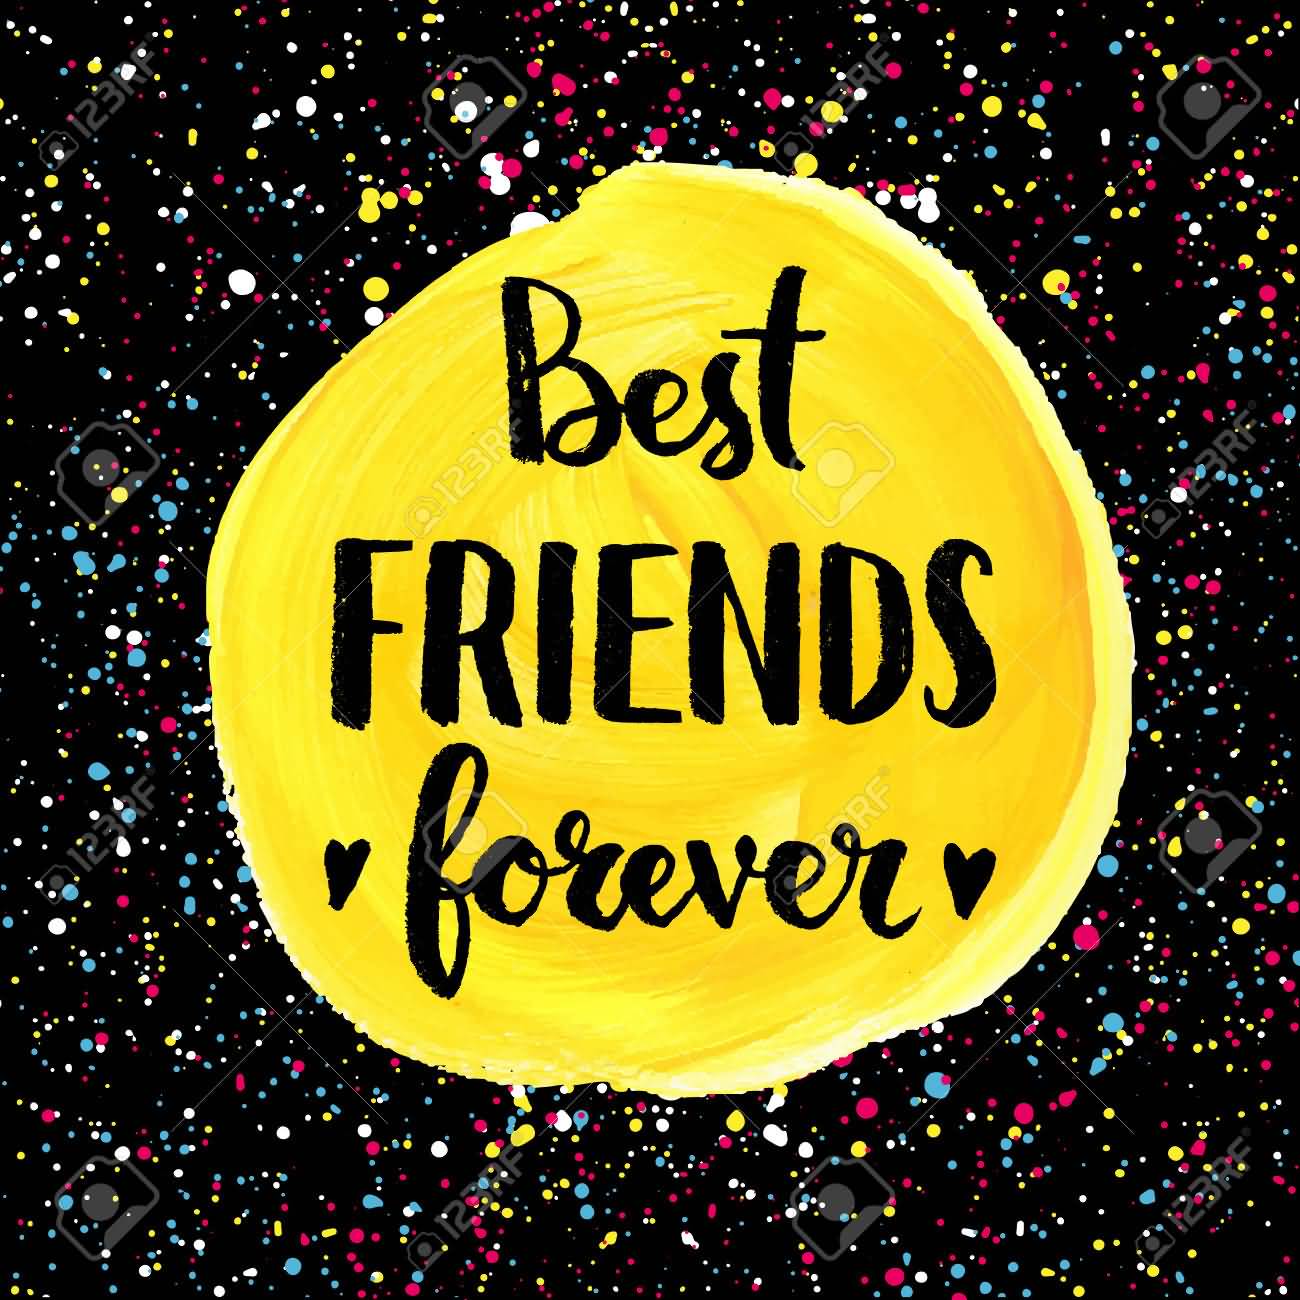 National Best Friends Day 2019 Wallpapers - Wallpaper Cave